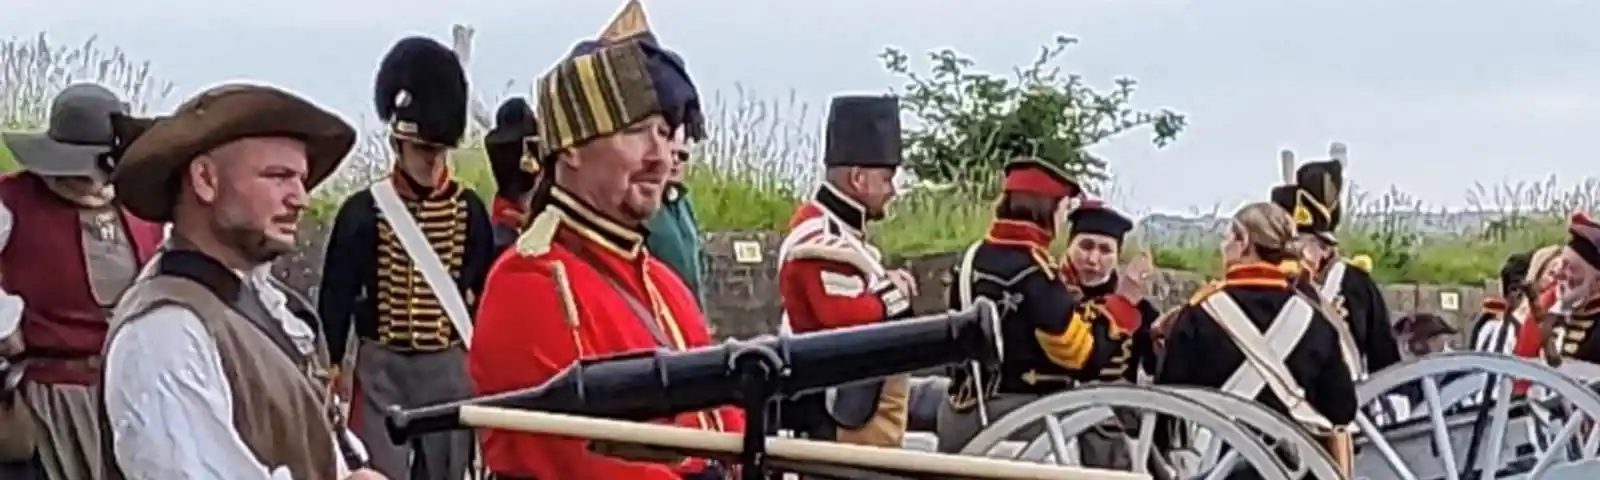 Fort Amherst Gunners